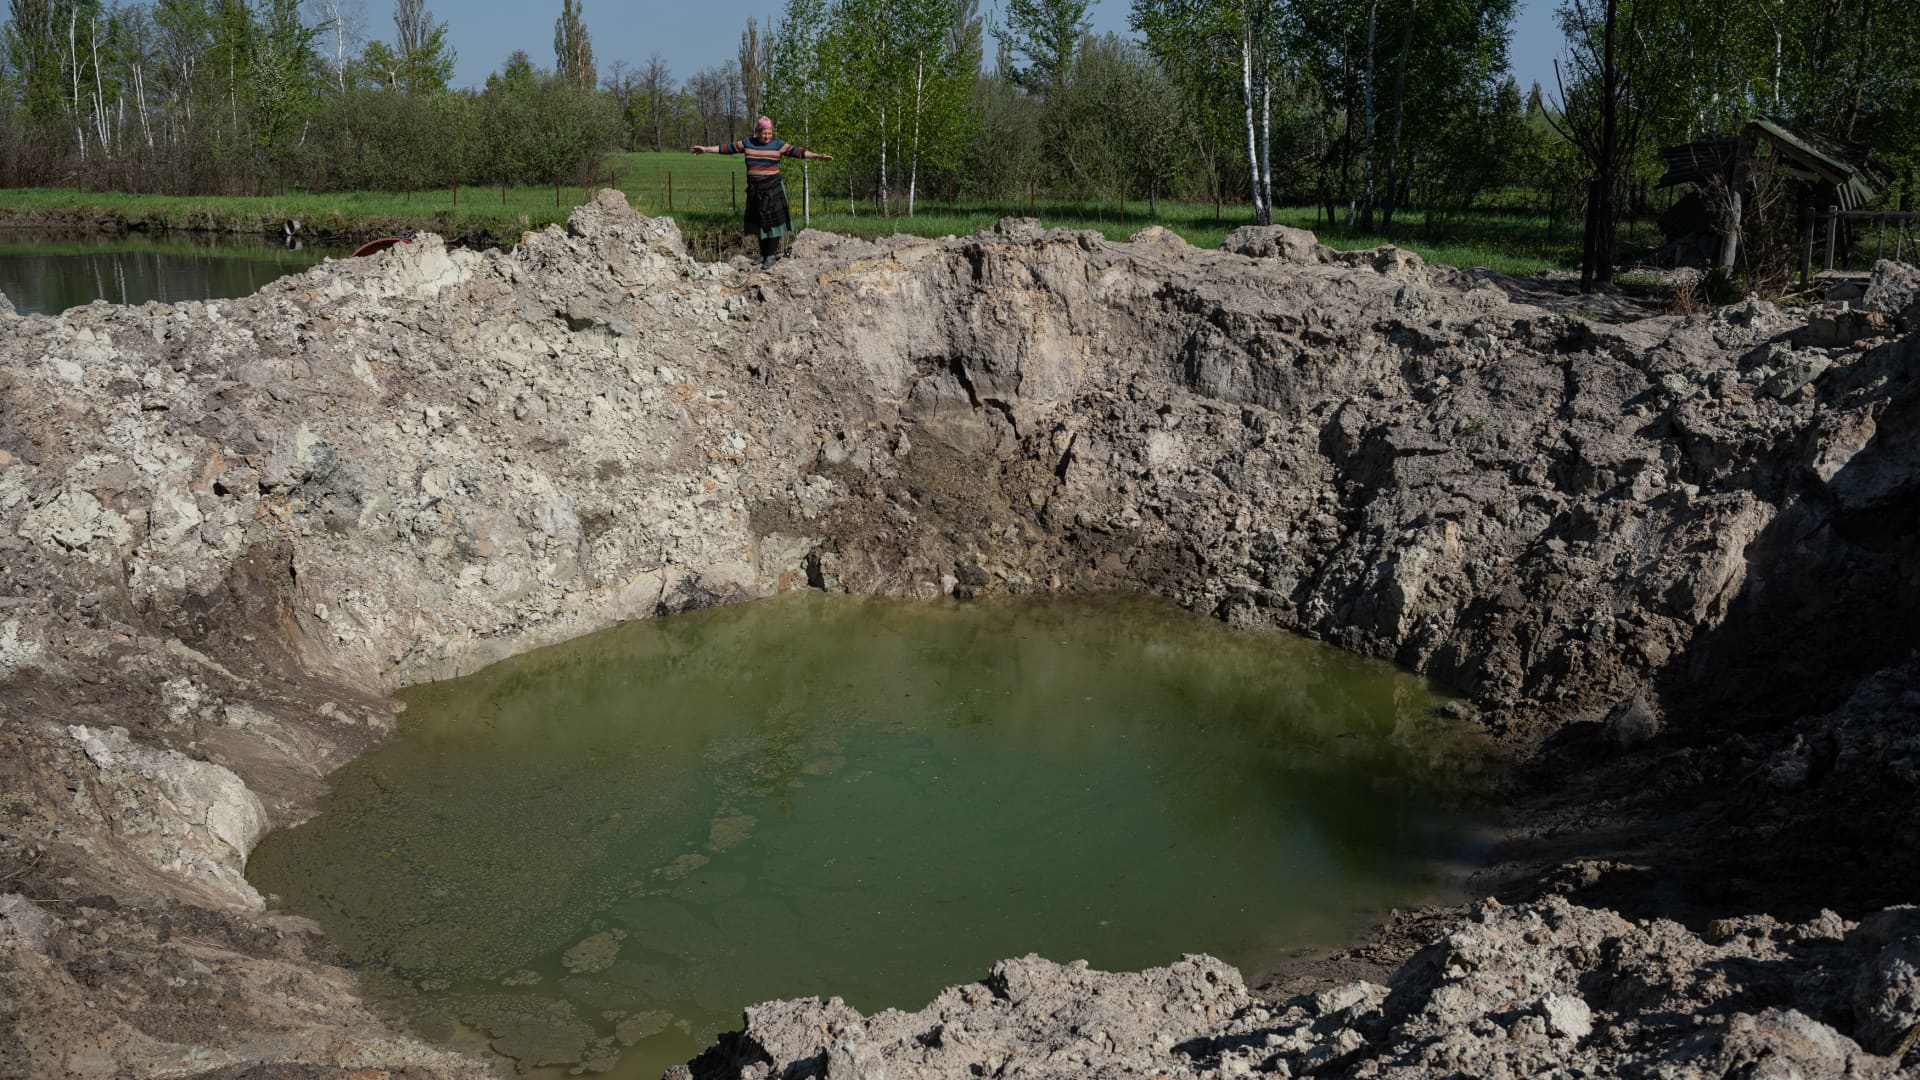 Tetiana Chernenko, 50, observes a huge crater made by an air bomb, on May 10, 2022 in Sloboda-Kukharivska, Ukraine. The towns around Kyiv are continuing a long road to what they hope is recovery, following weeks of brutal war as Russia made its failed bid to take Ukraine's capital.